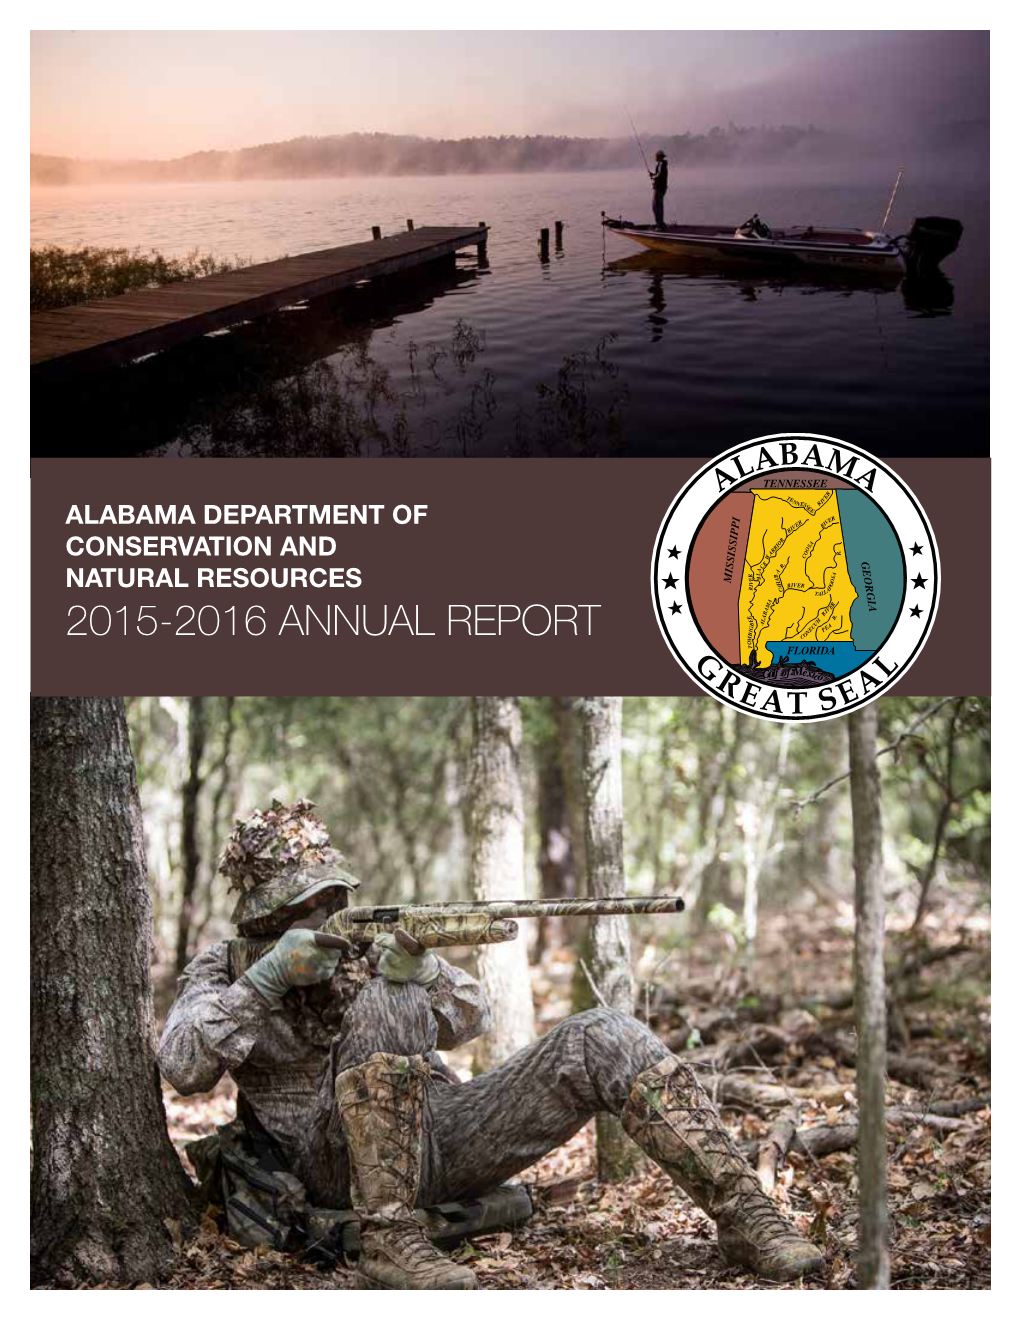 2015-2016 ANNUAL REPORT BILLY POPE Honorable Kay Ivey Governor of Alabama State Capitol Montgomery, AL 36130